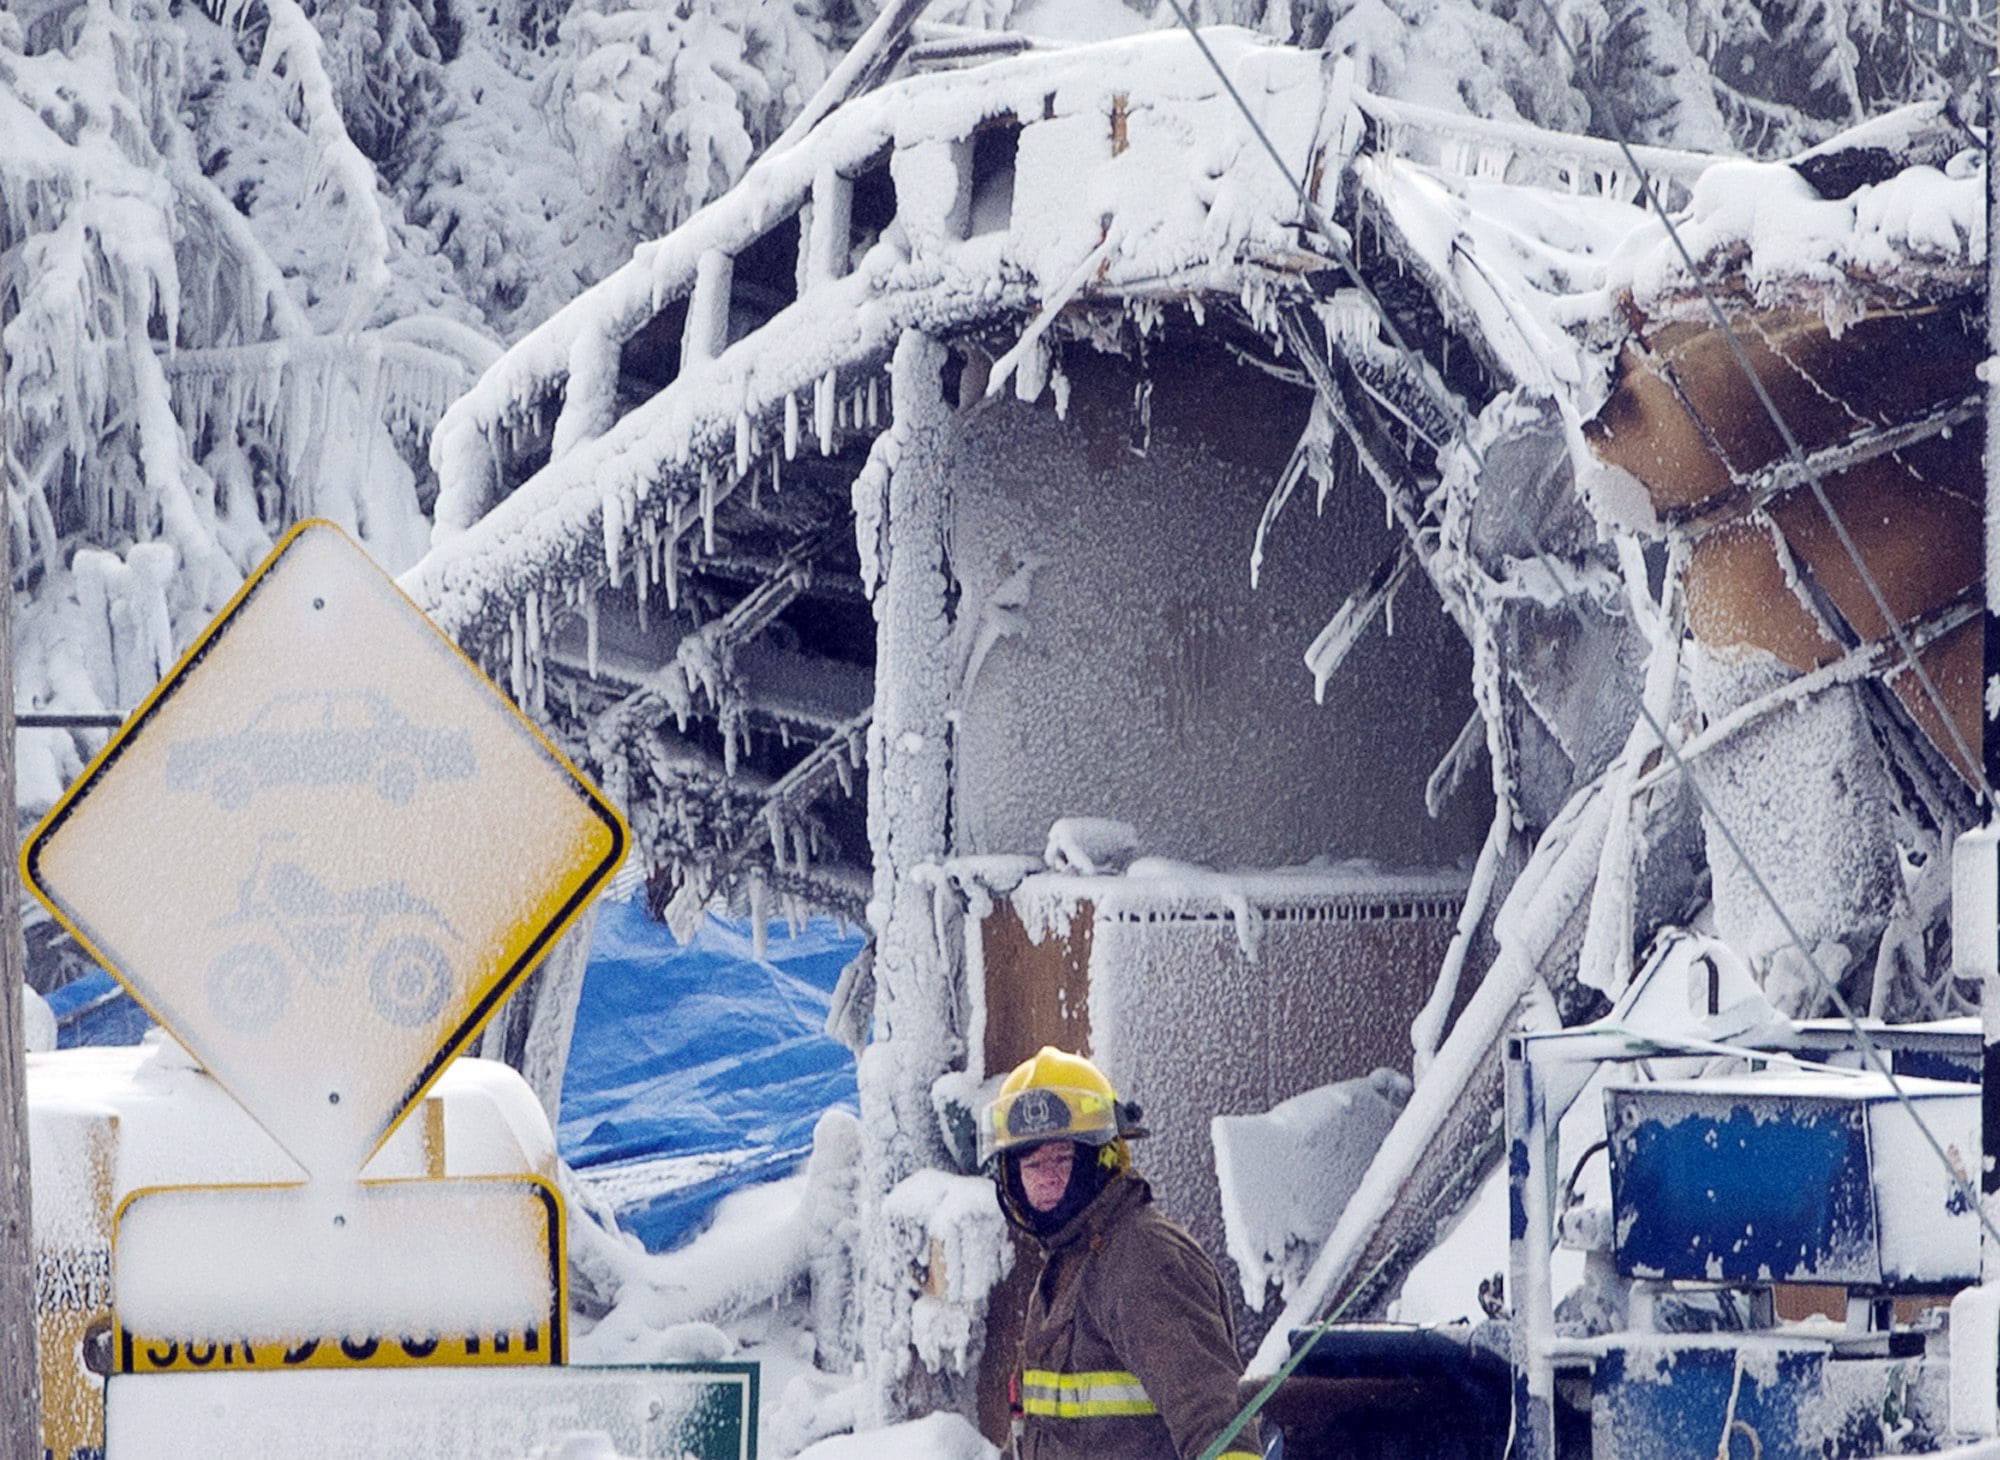 Emergency workers resume the search for victims Sunday at a fatal seniors residence fire in L'Isle-Verte, Quebec.